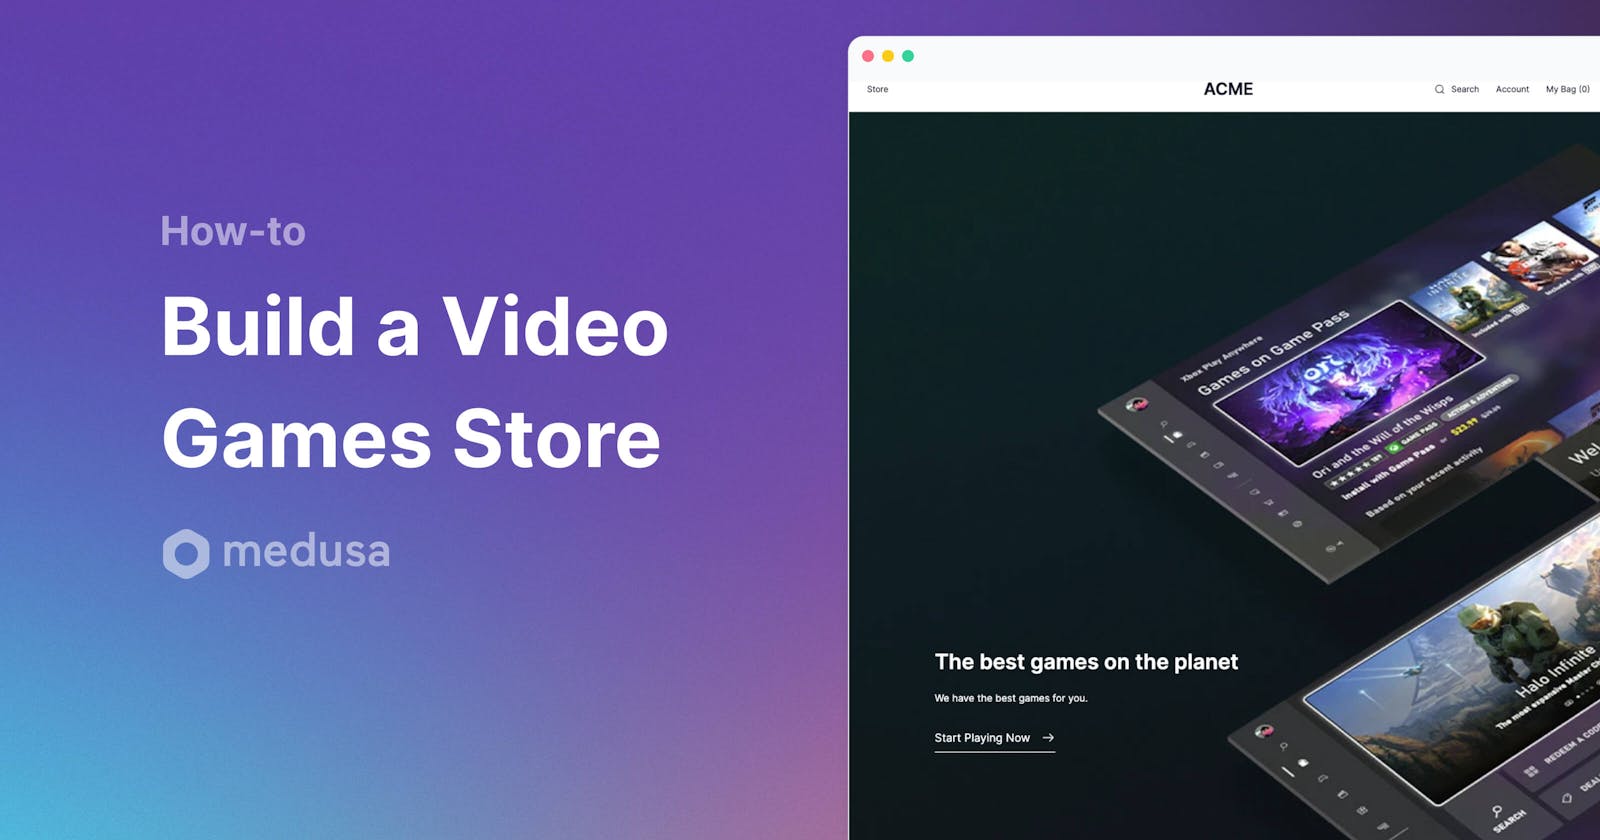 How I Built a Video Game Store with Medusa, Next.js, Stripe, and Algolia